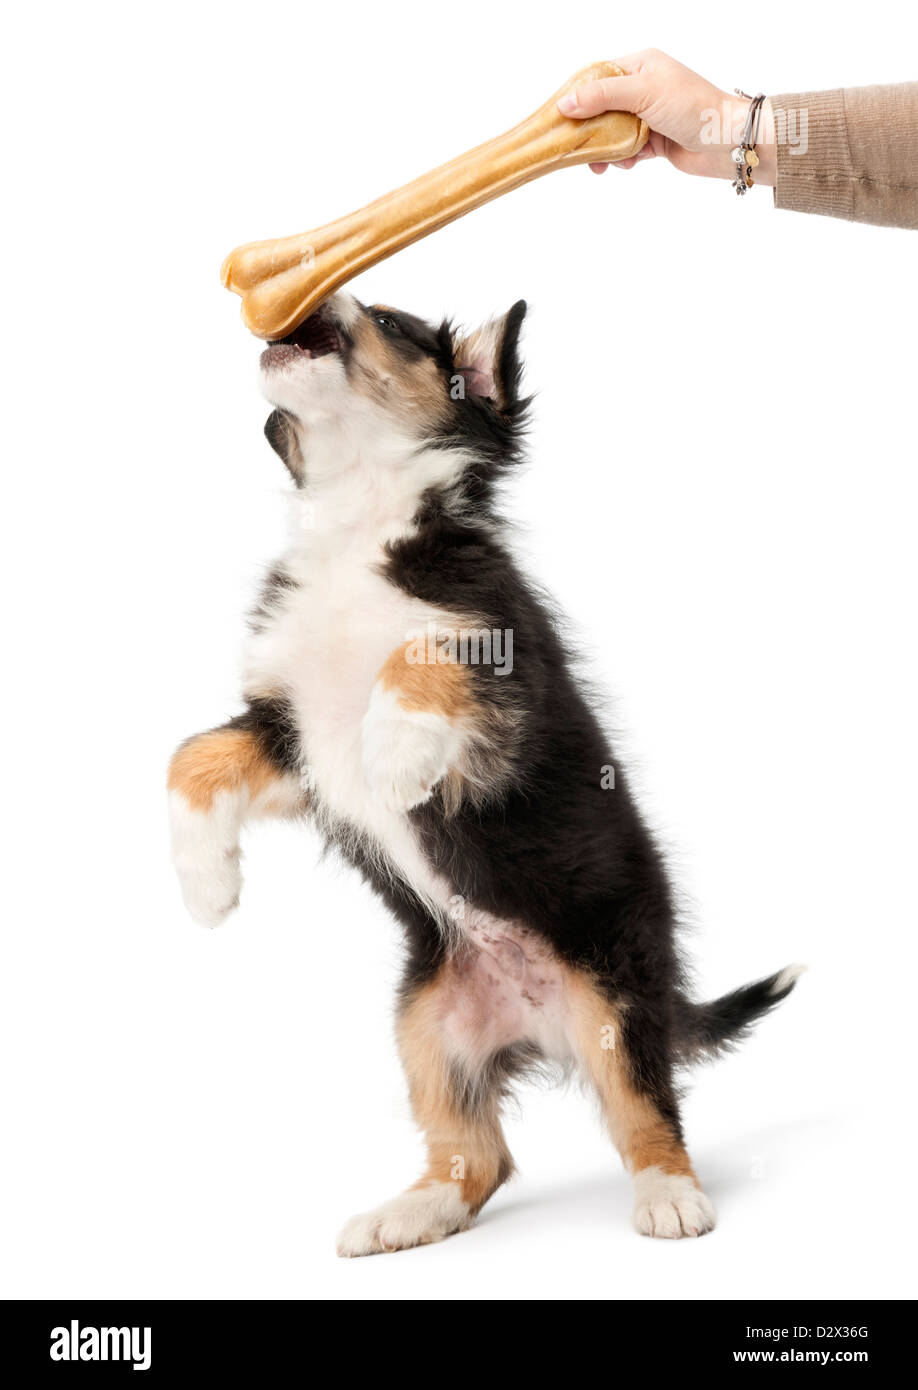 Australian Shepherd puppy, 2 months old, looking up at a knuckle bone against white background Stock Photo